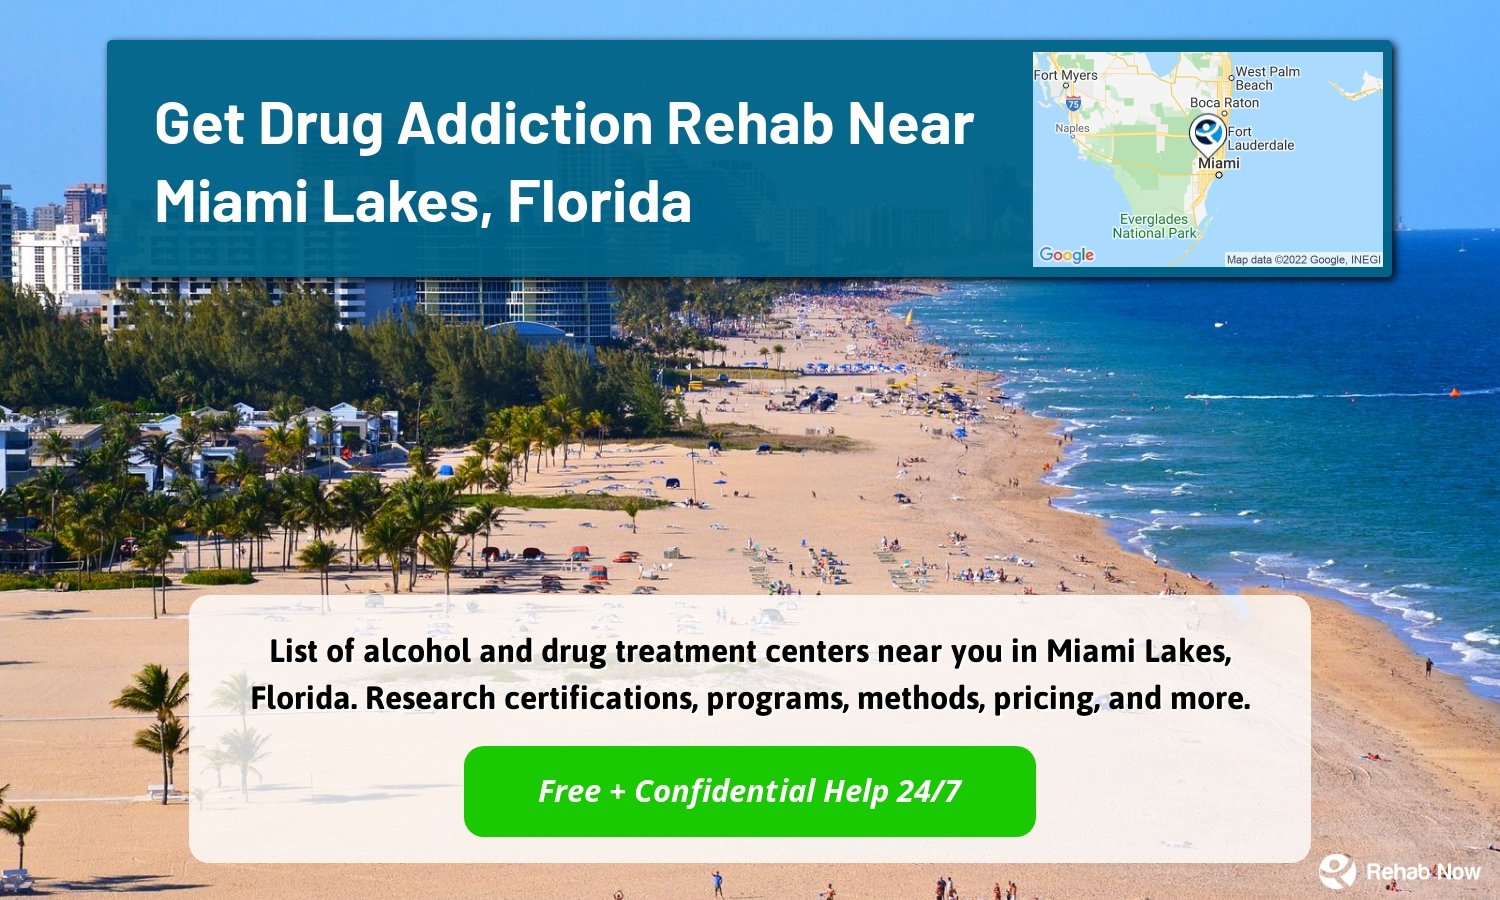 List of alcohol and drug treatment centers near you in Miami Lakes, Florida. Research certifications, programs, methods, pricing, and more.